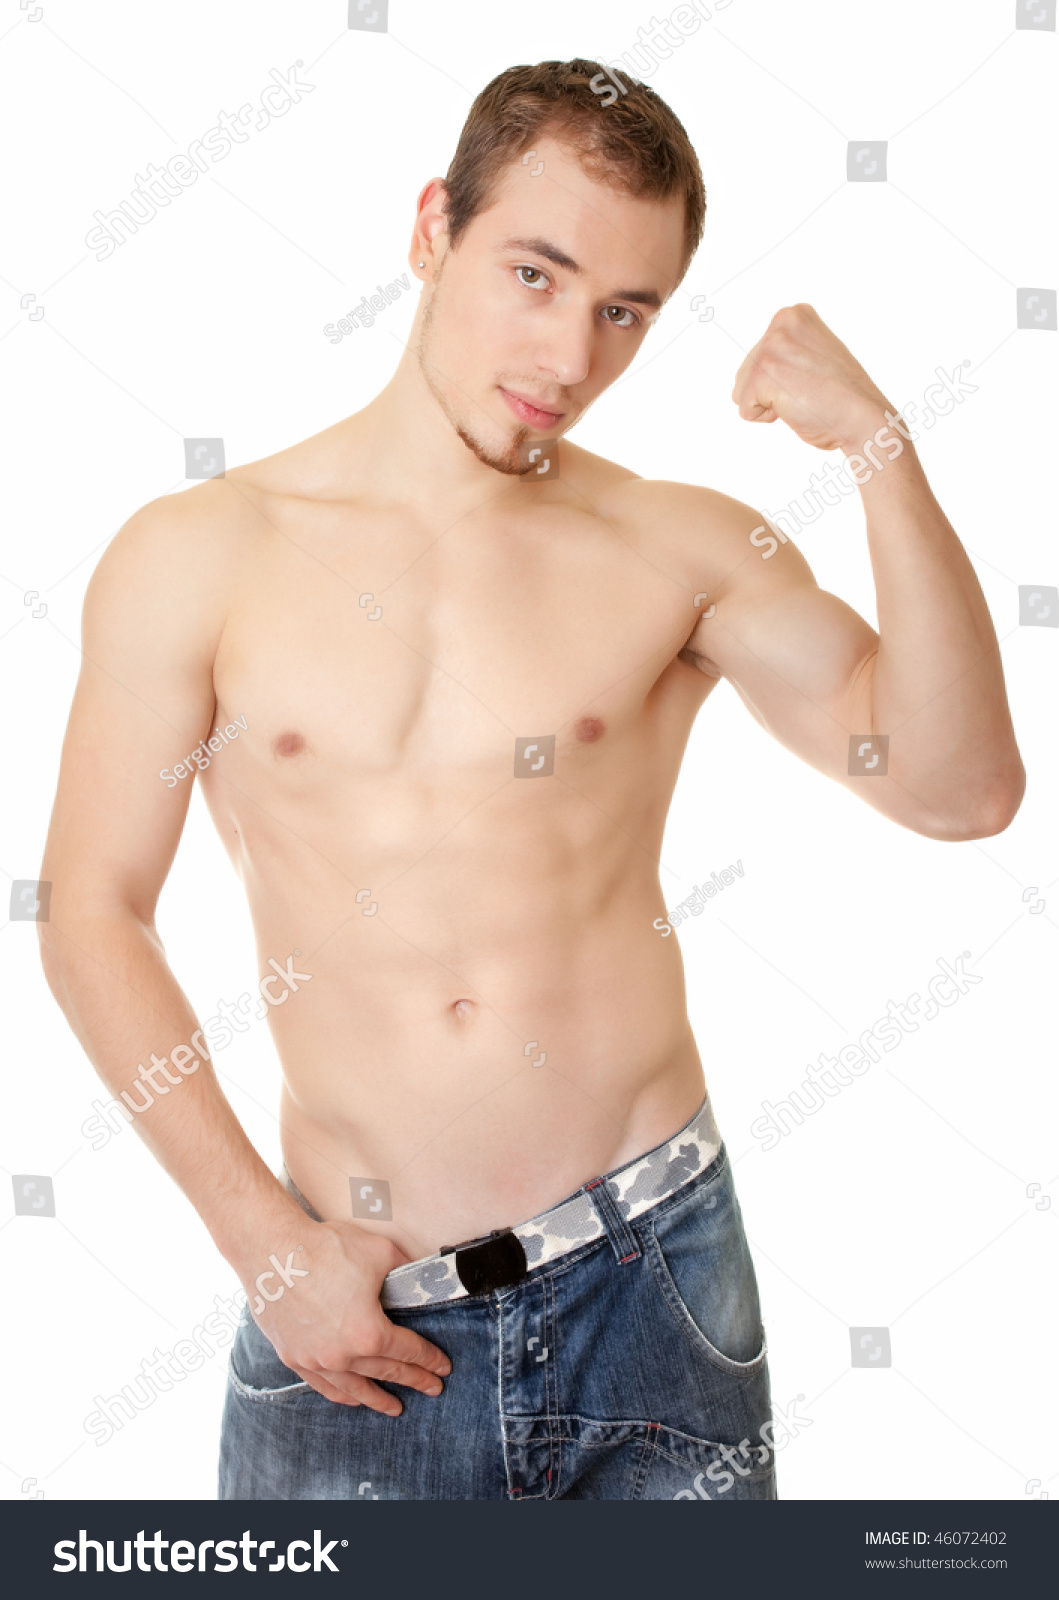 Man With The Bared Torso In A Loincloth Stock Photo 